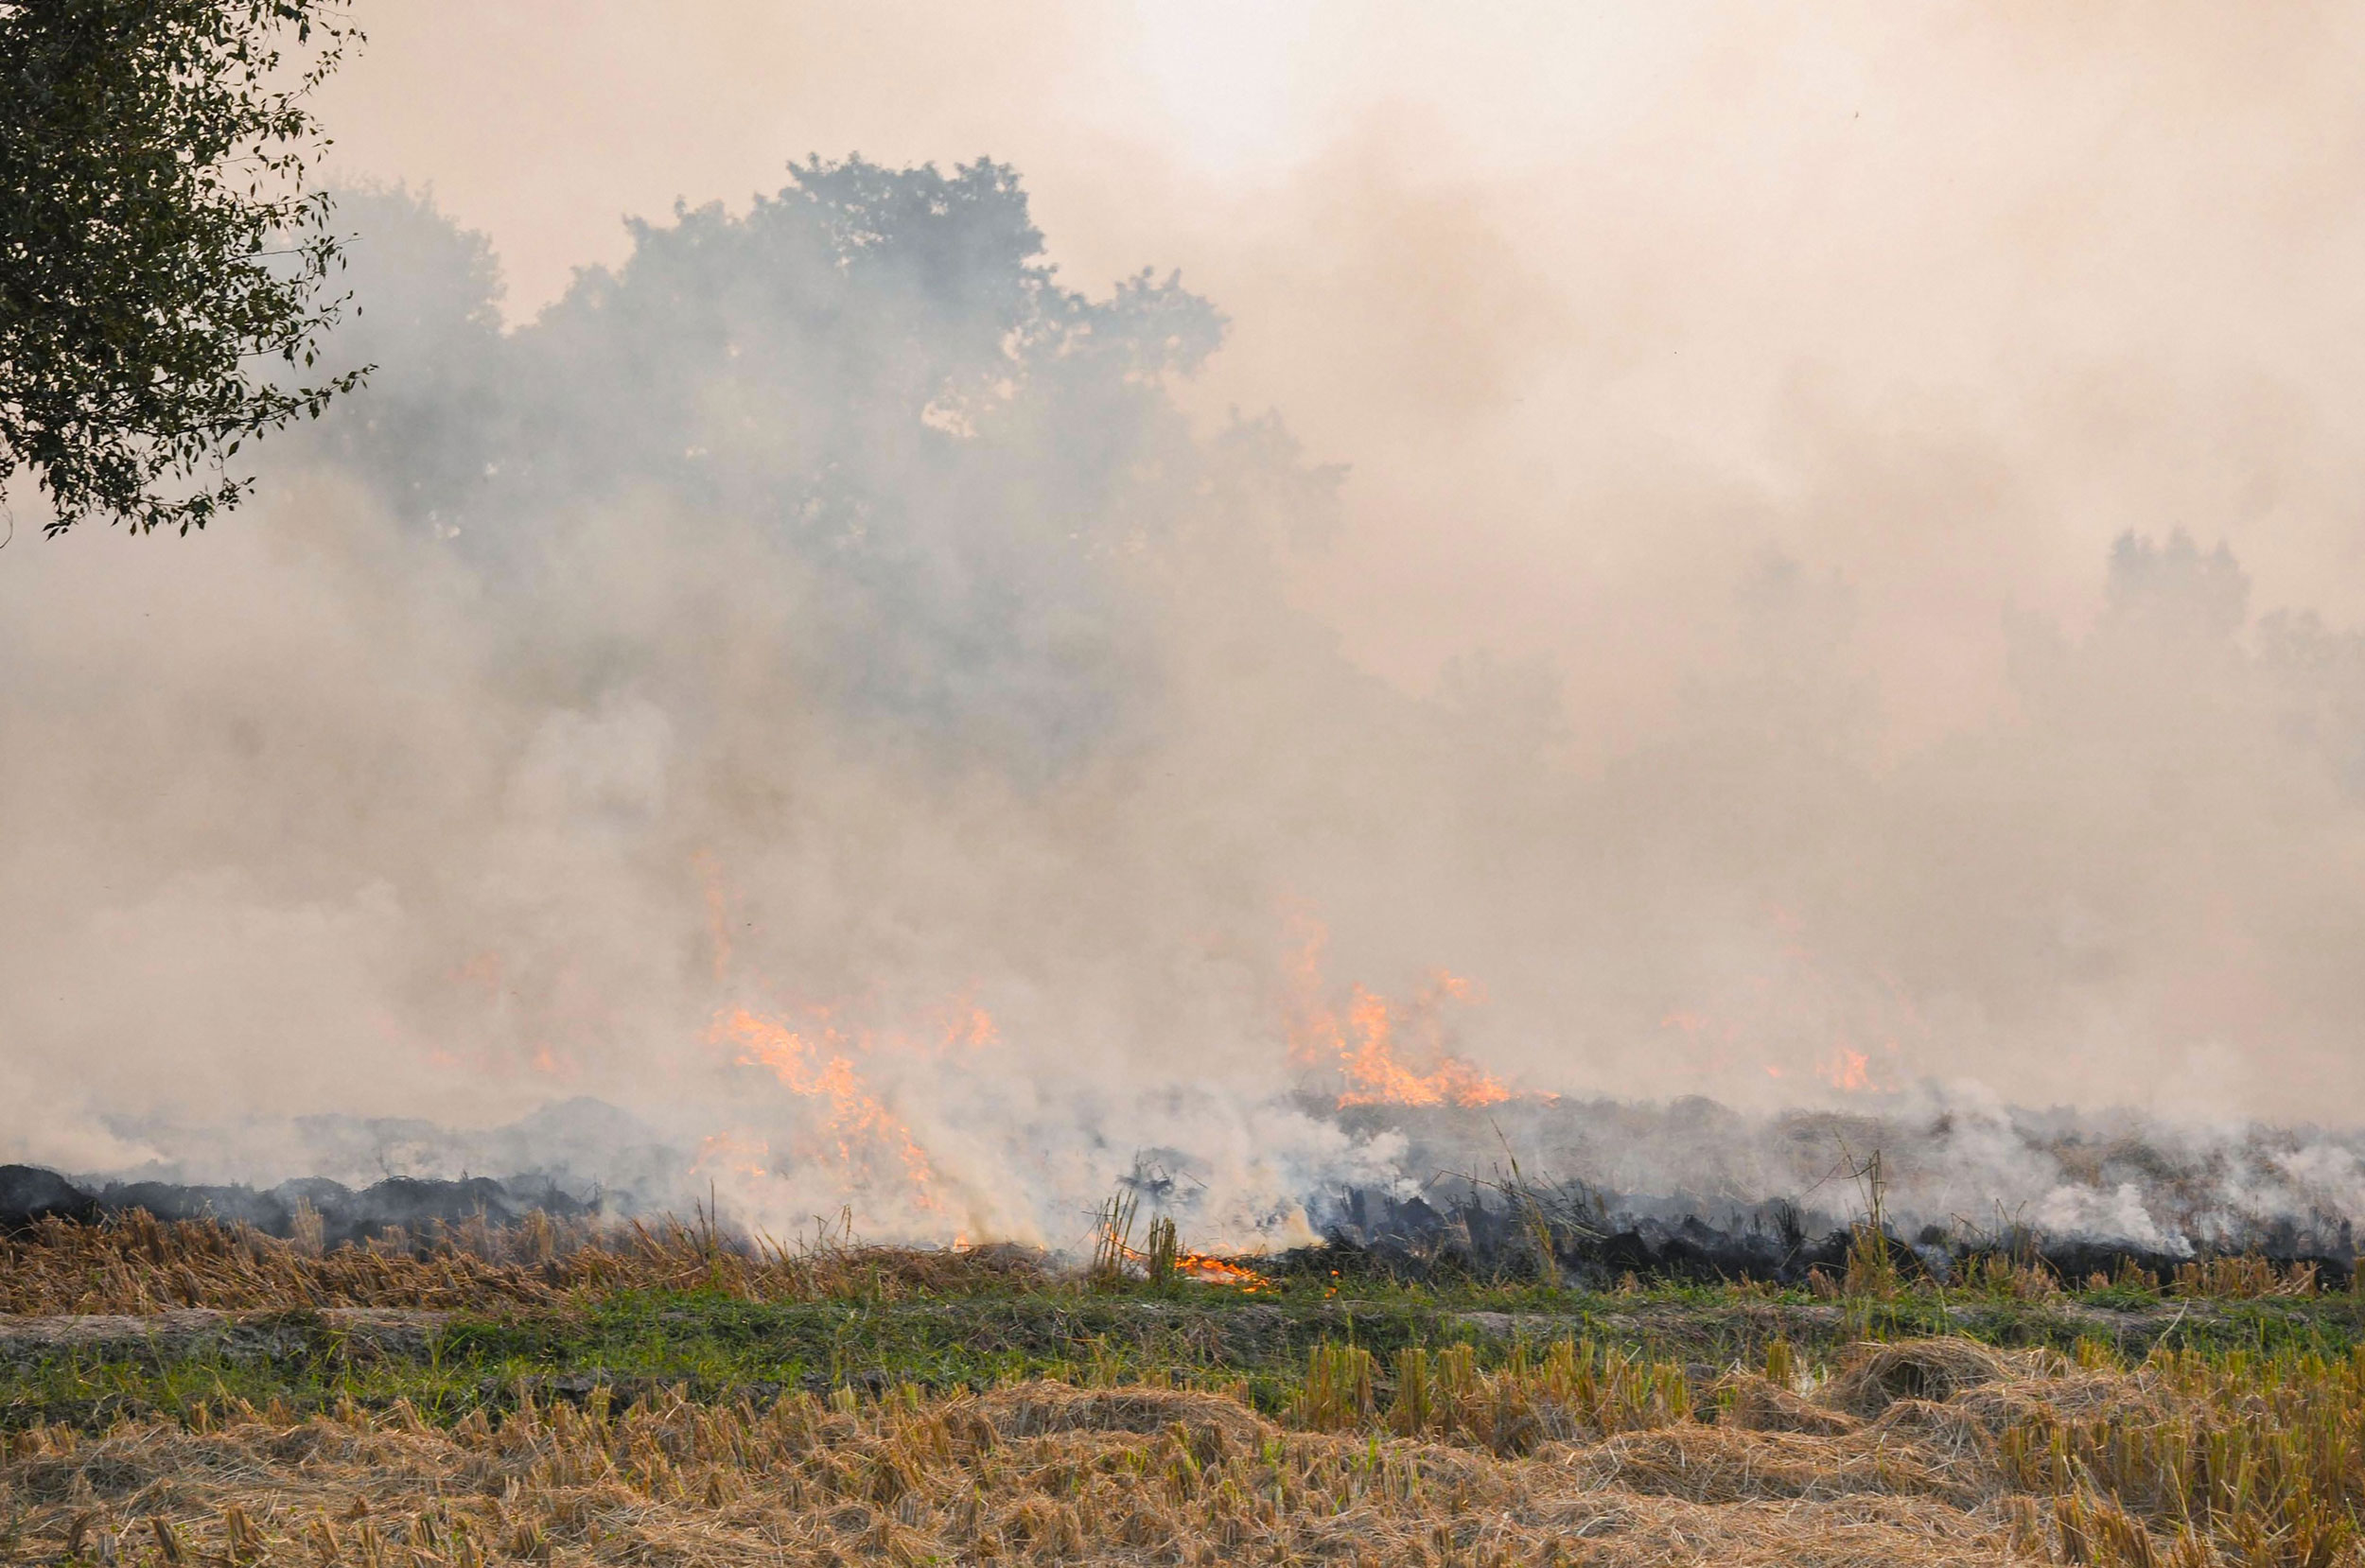 Paddy stubble burns in a farm on the outskirts of Amritsar on October 31, 2019. Delhi is being choked, as is the case now every year, with smog, some of which is undoubtedly the result of the burning of stubble in Punjab. 